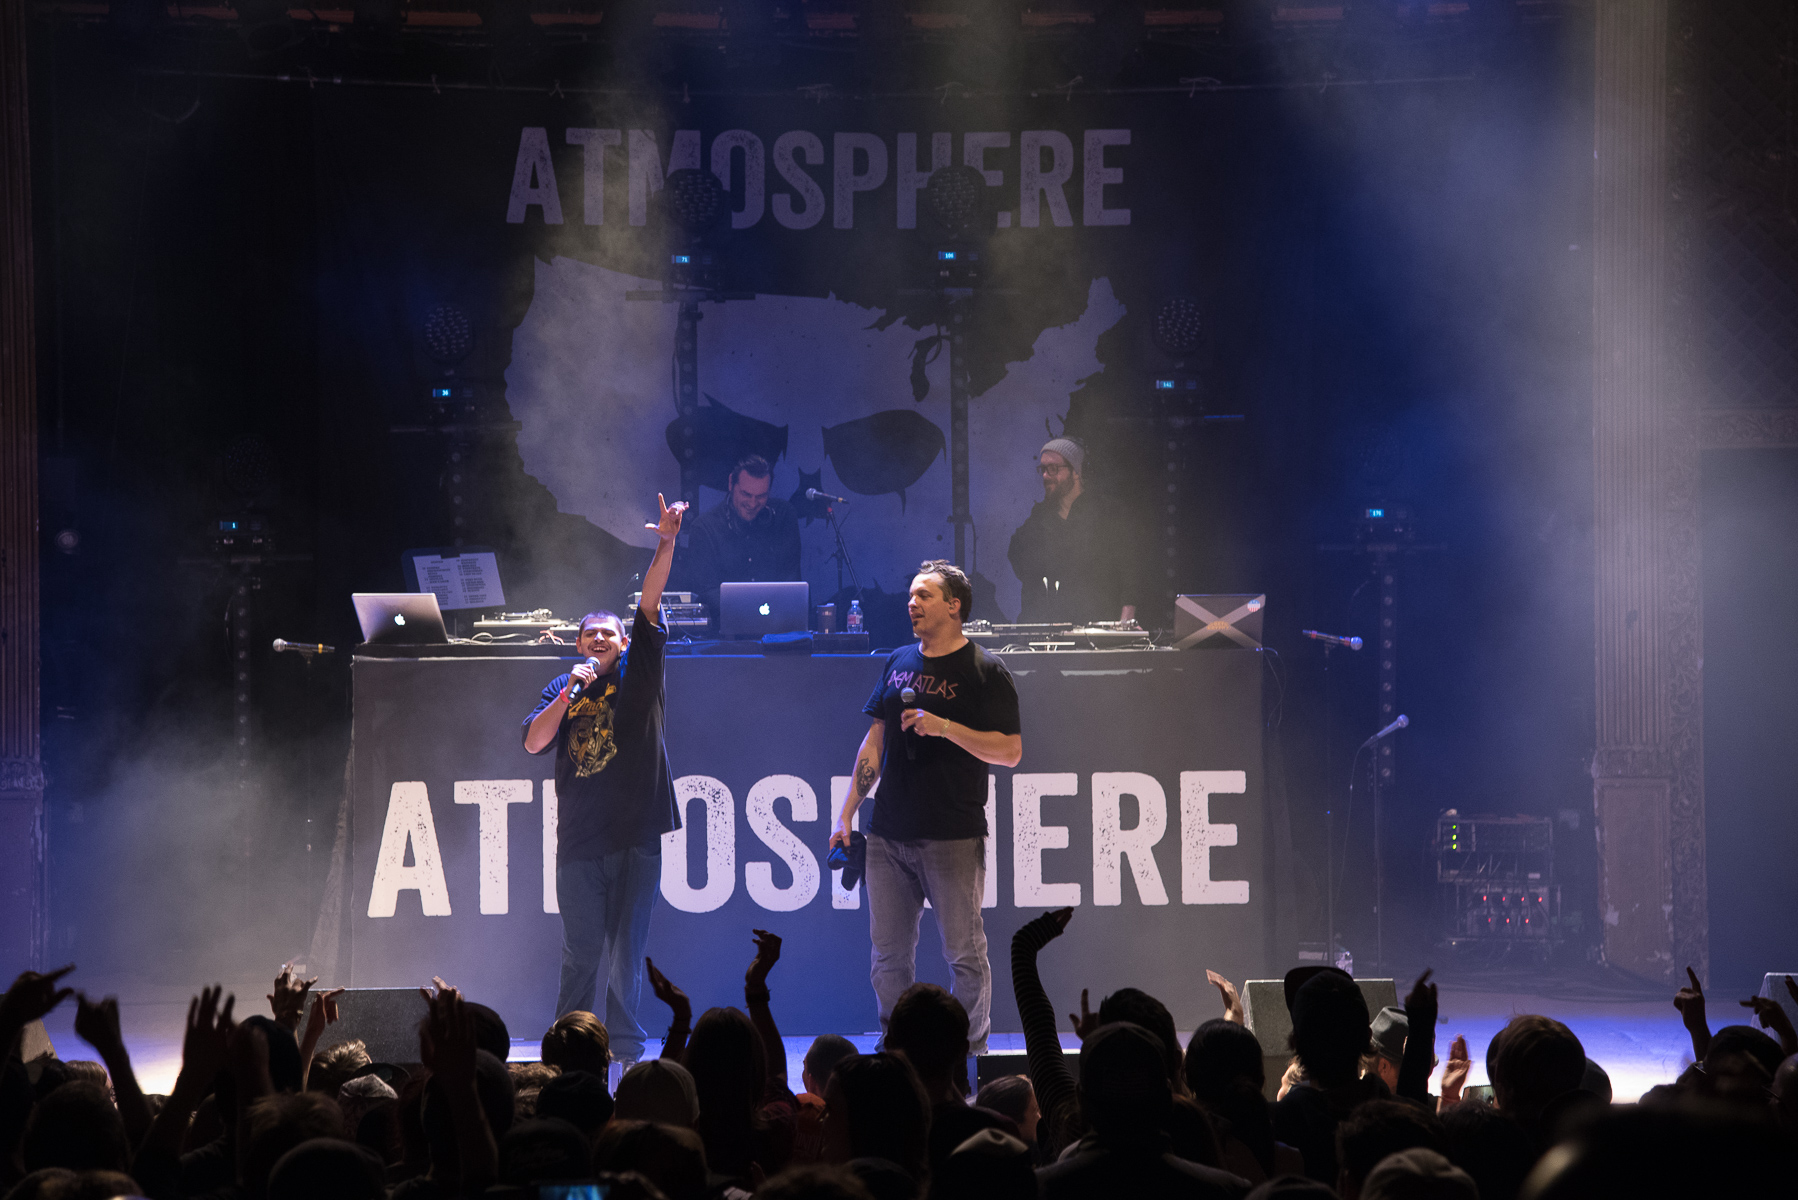 Atmosphere, live artists